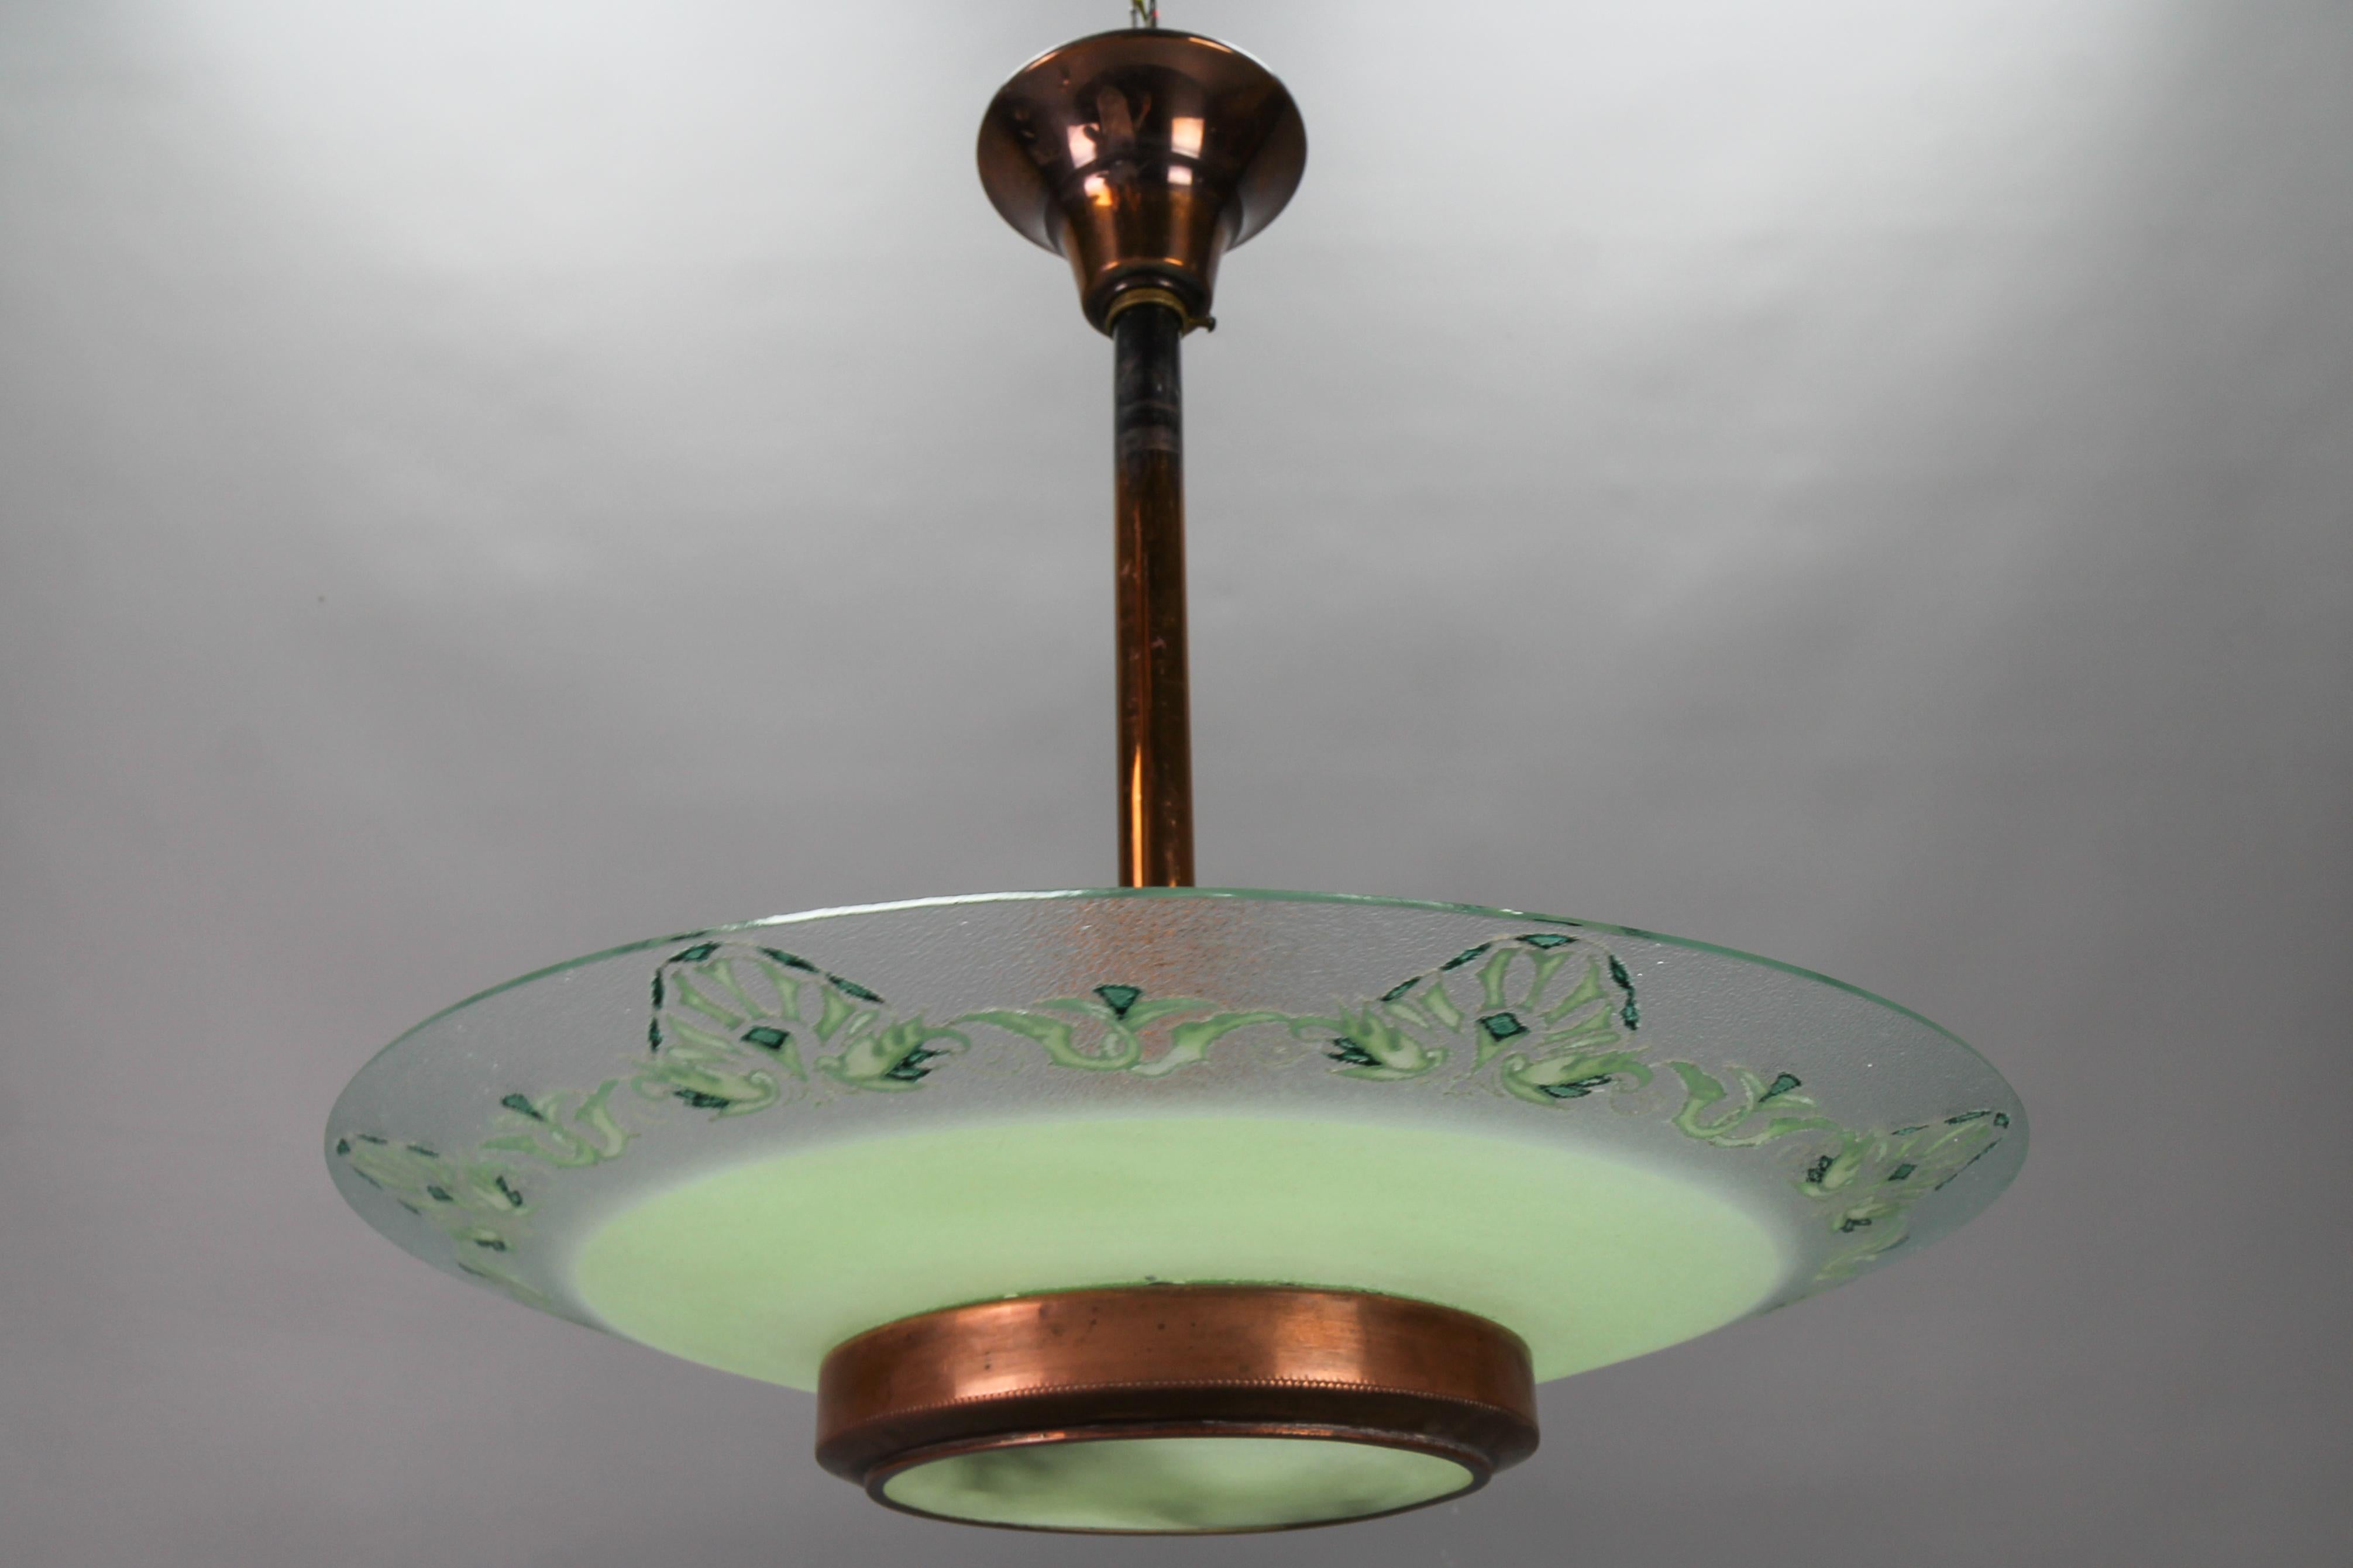 French Art Deco green glass and copper pendant chandelier by Loys Lucha from circa 1930s.
This beautiful pendant light features a lightly textured green and clear glass lampshade with stylized flower motifs on the clear glass part. Copper fixture